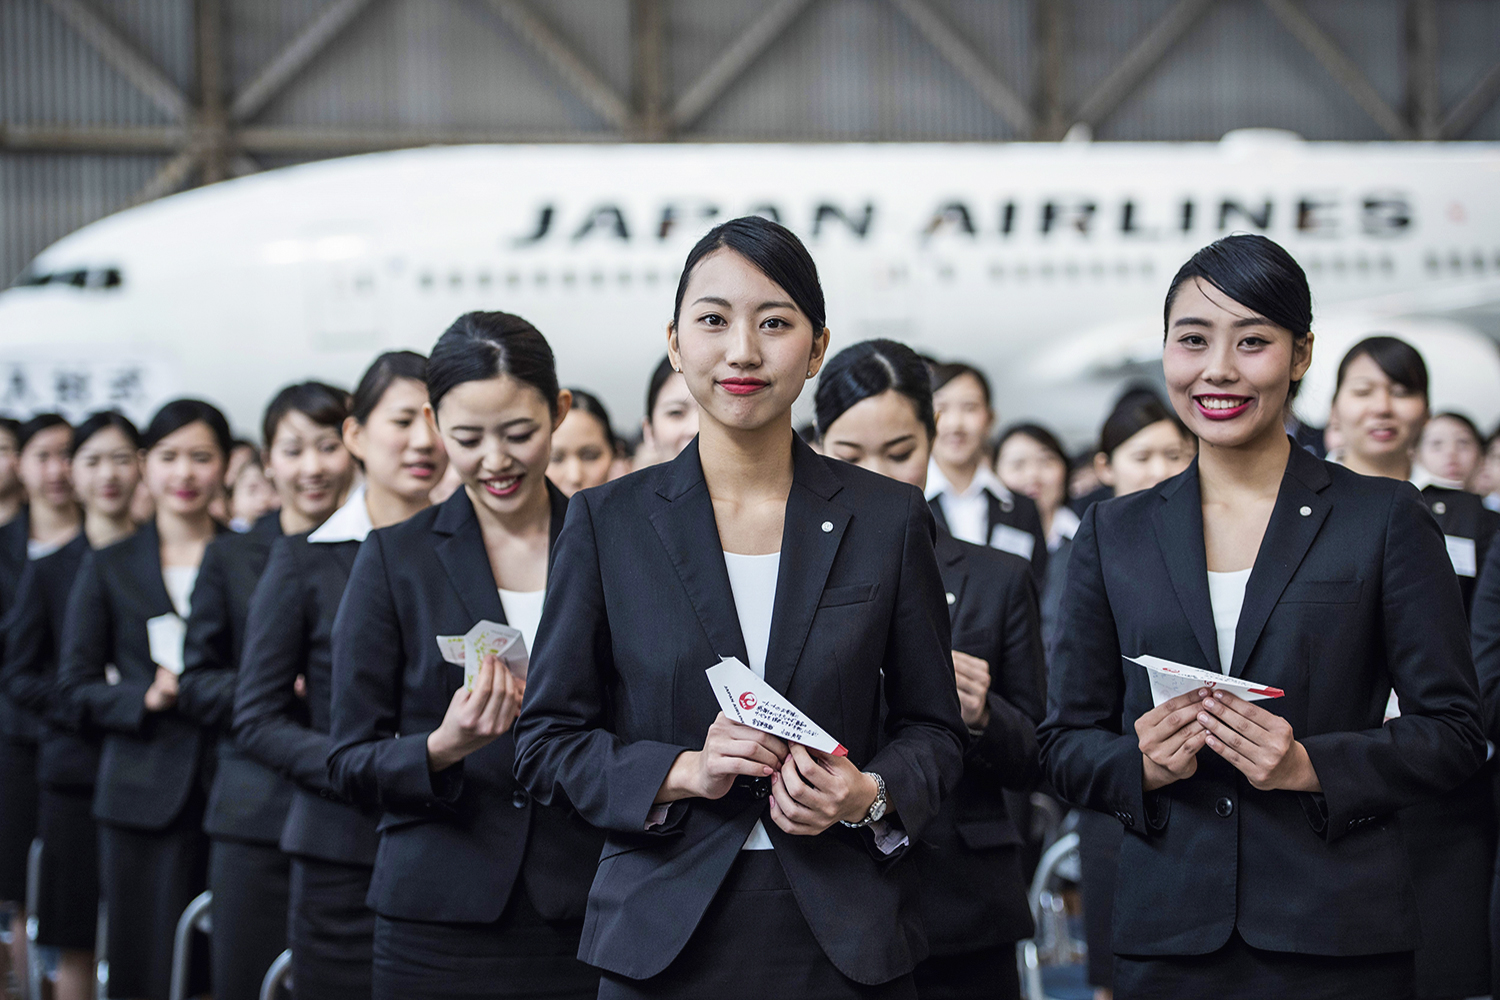 NO AR - Japan Airlines: sai “Ladies and gentlemen”, entra “Welcome, everyone” -